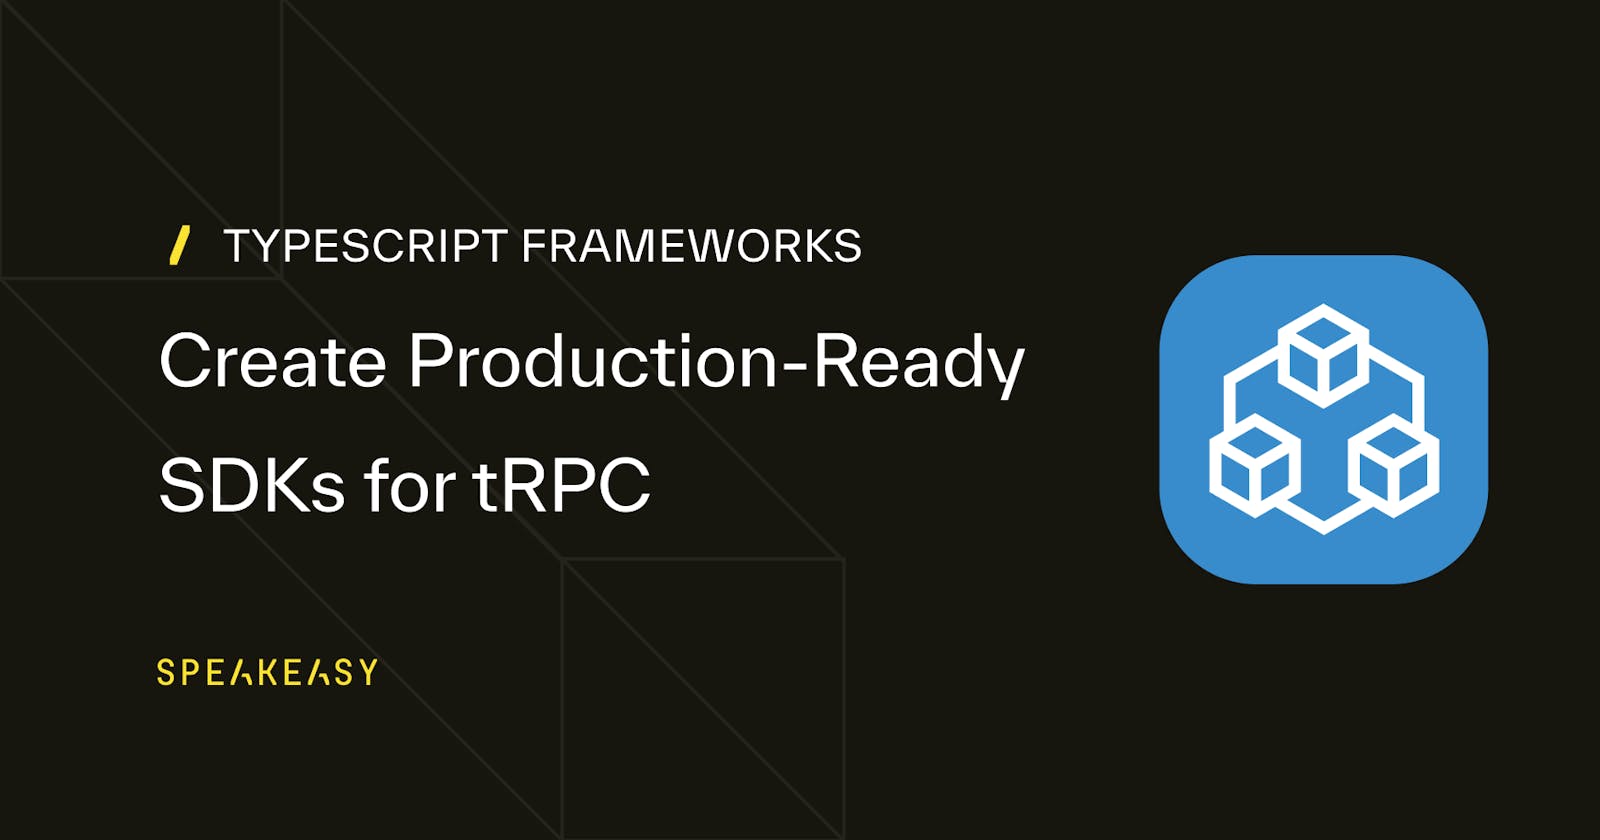 Create Production-Ready SDKs for tRPC